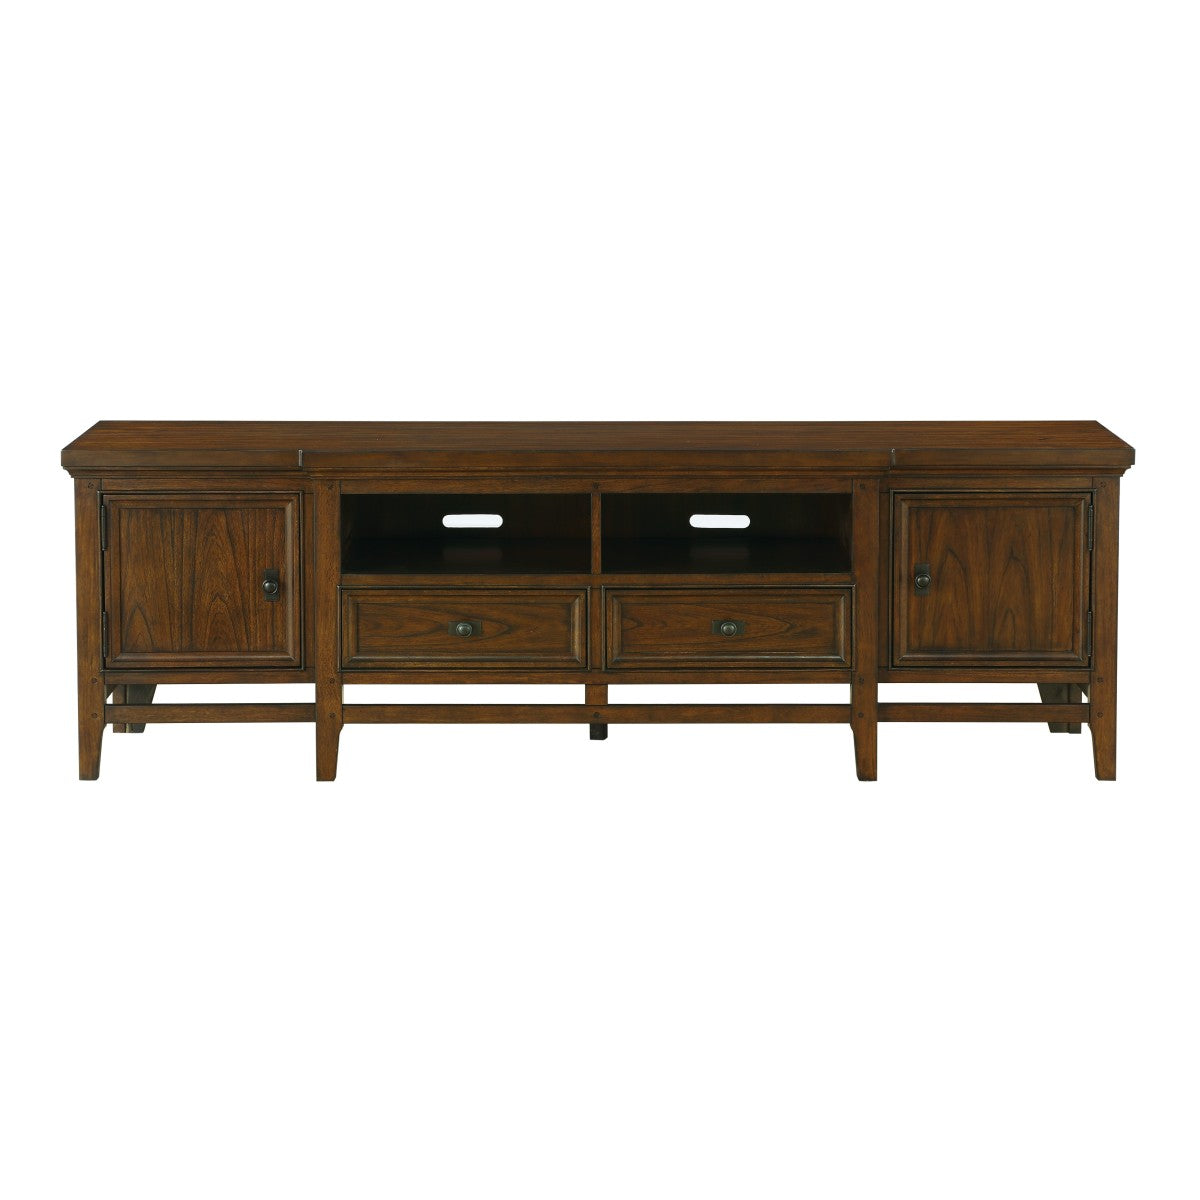 Frazier Park Brown Cherry Modern Contemporary Mindy Veneer, Wood And Engineered Wood Tv Stand